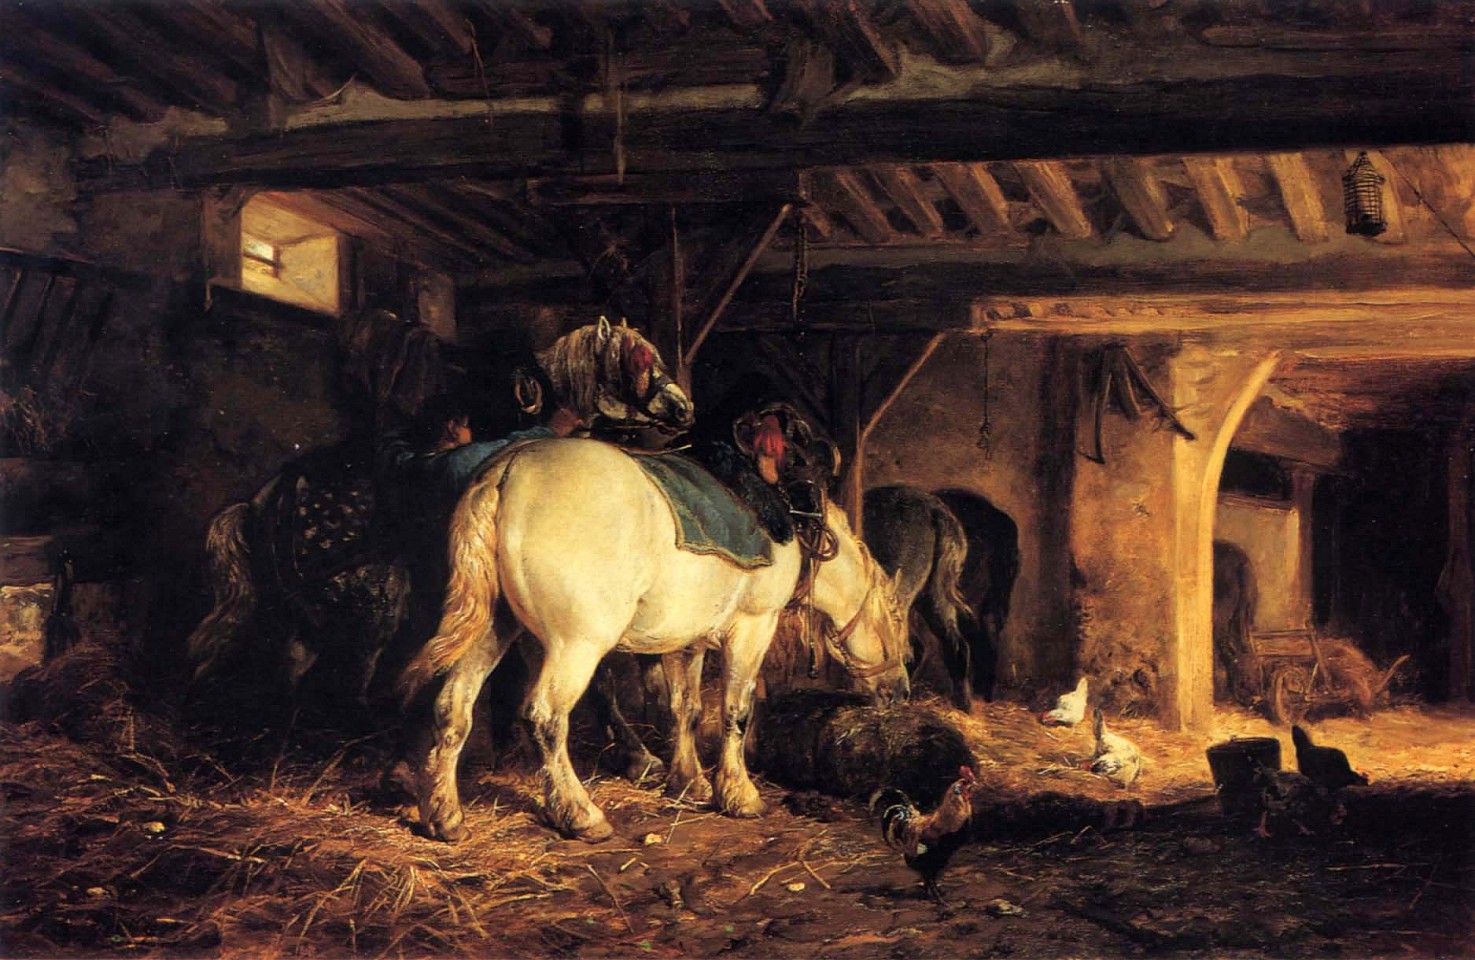 Charles Emile Jacque, In the Stable, ca. 1873-75
Oil on canvas, 19 1/2 x 29 1/2 in. (49.5 x 74.9 cm)
JAC-003-PA
$43,500